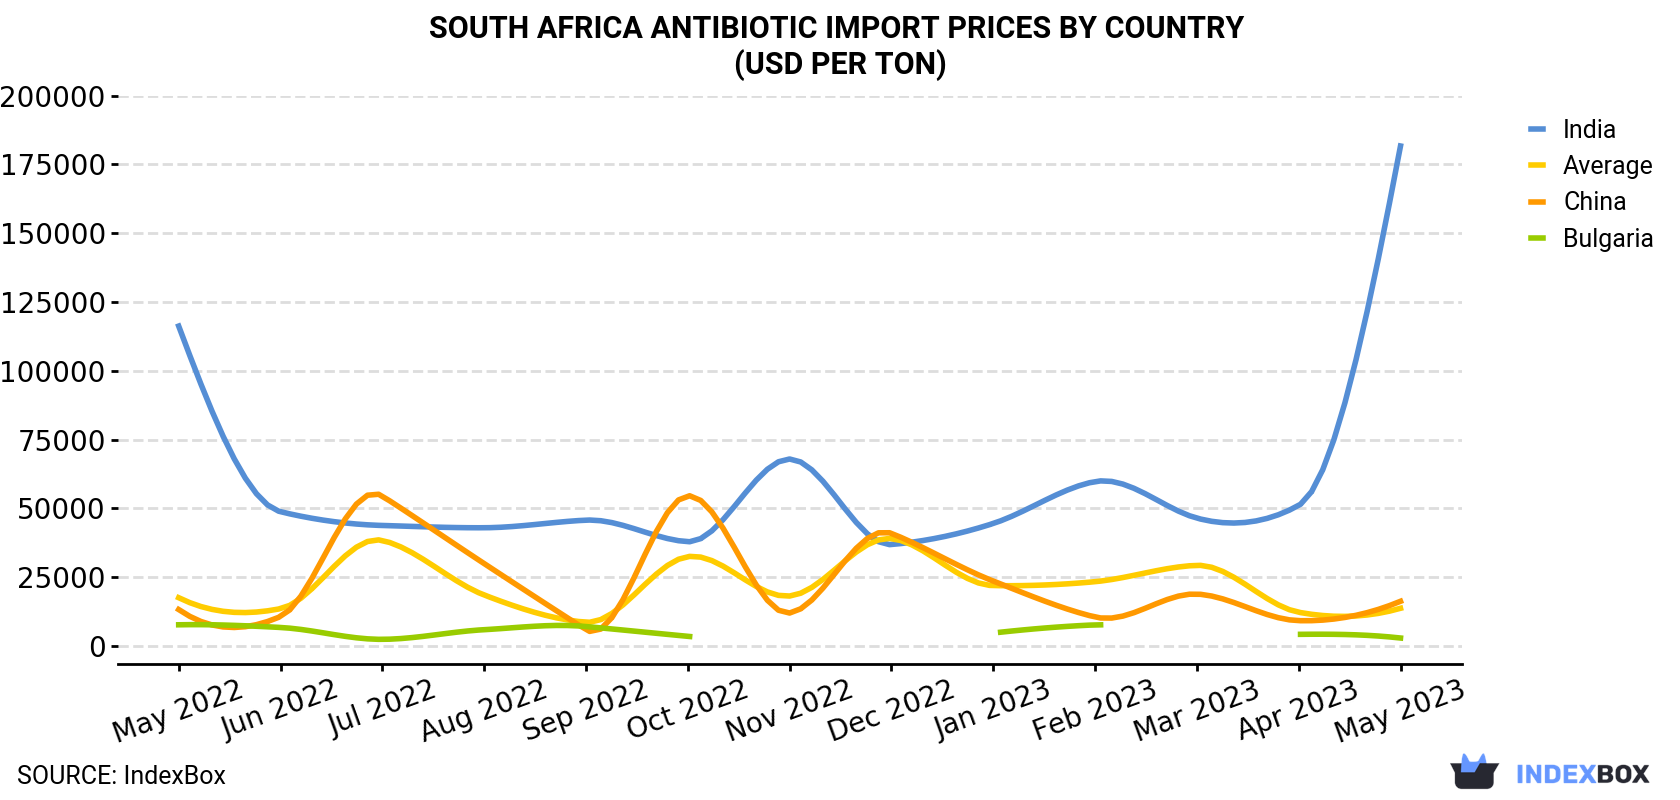 South Africa Antibiotic Import Prices By Country (USD Per Ton)